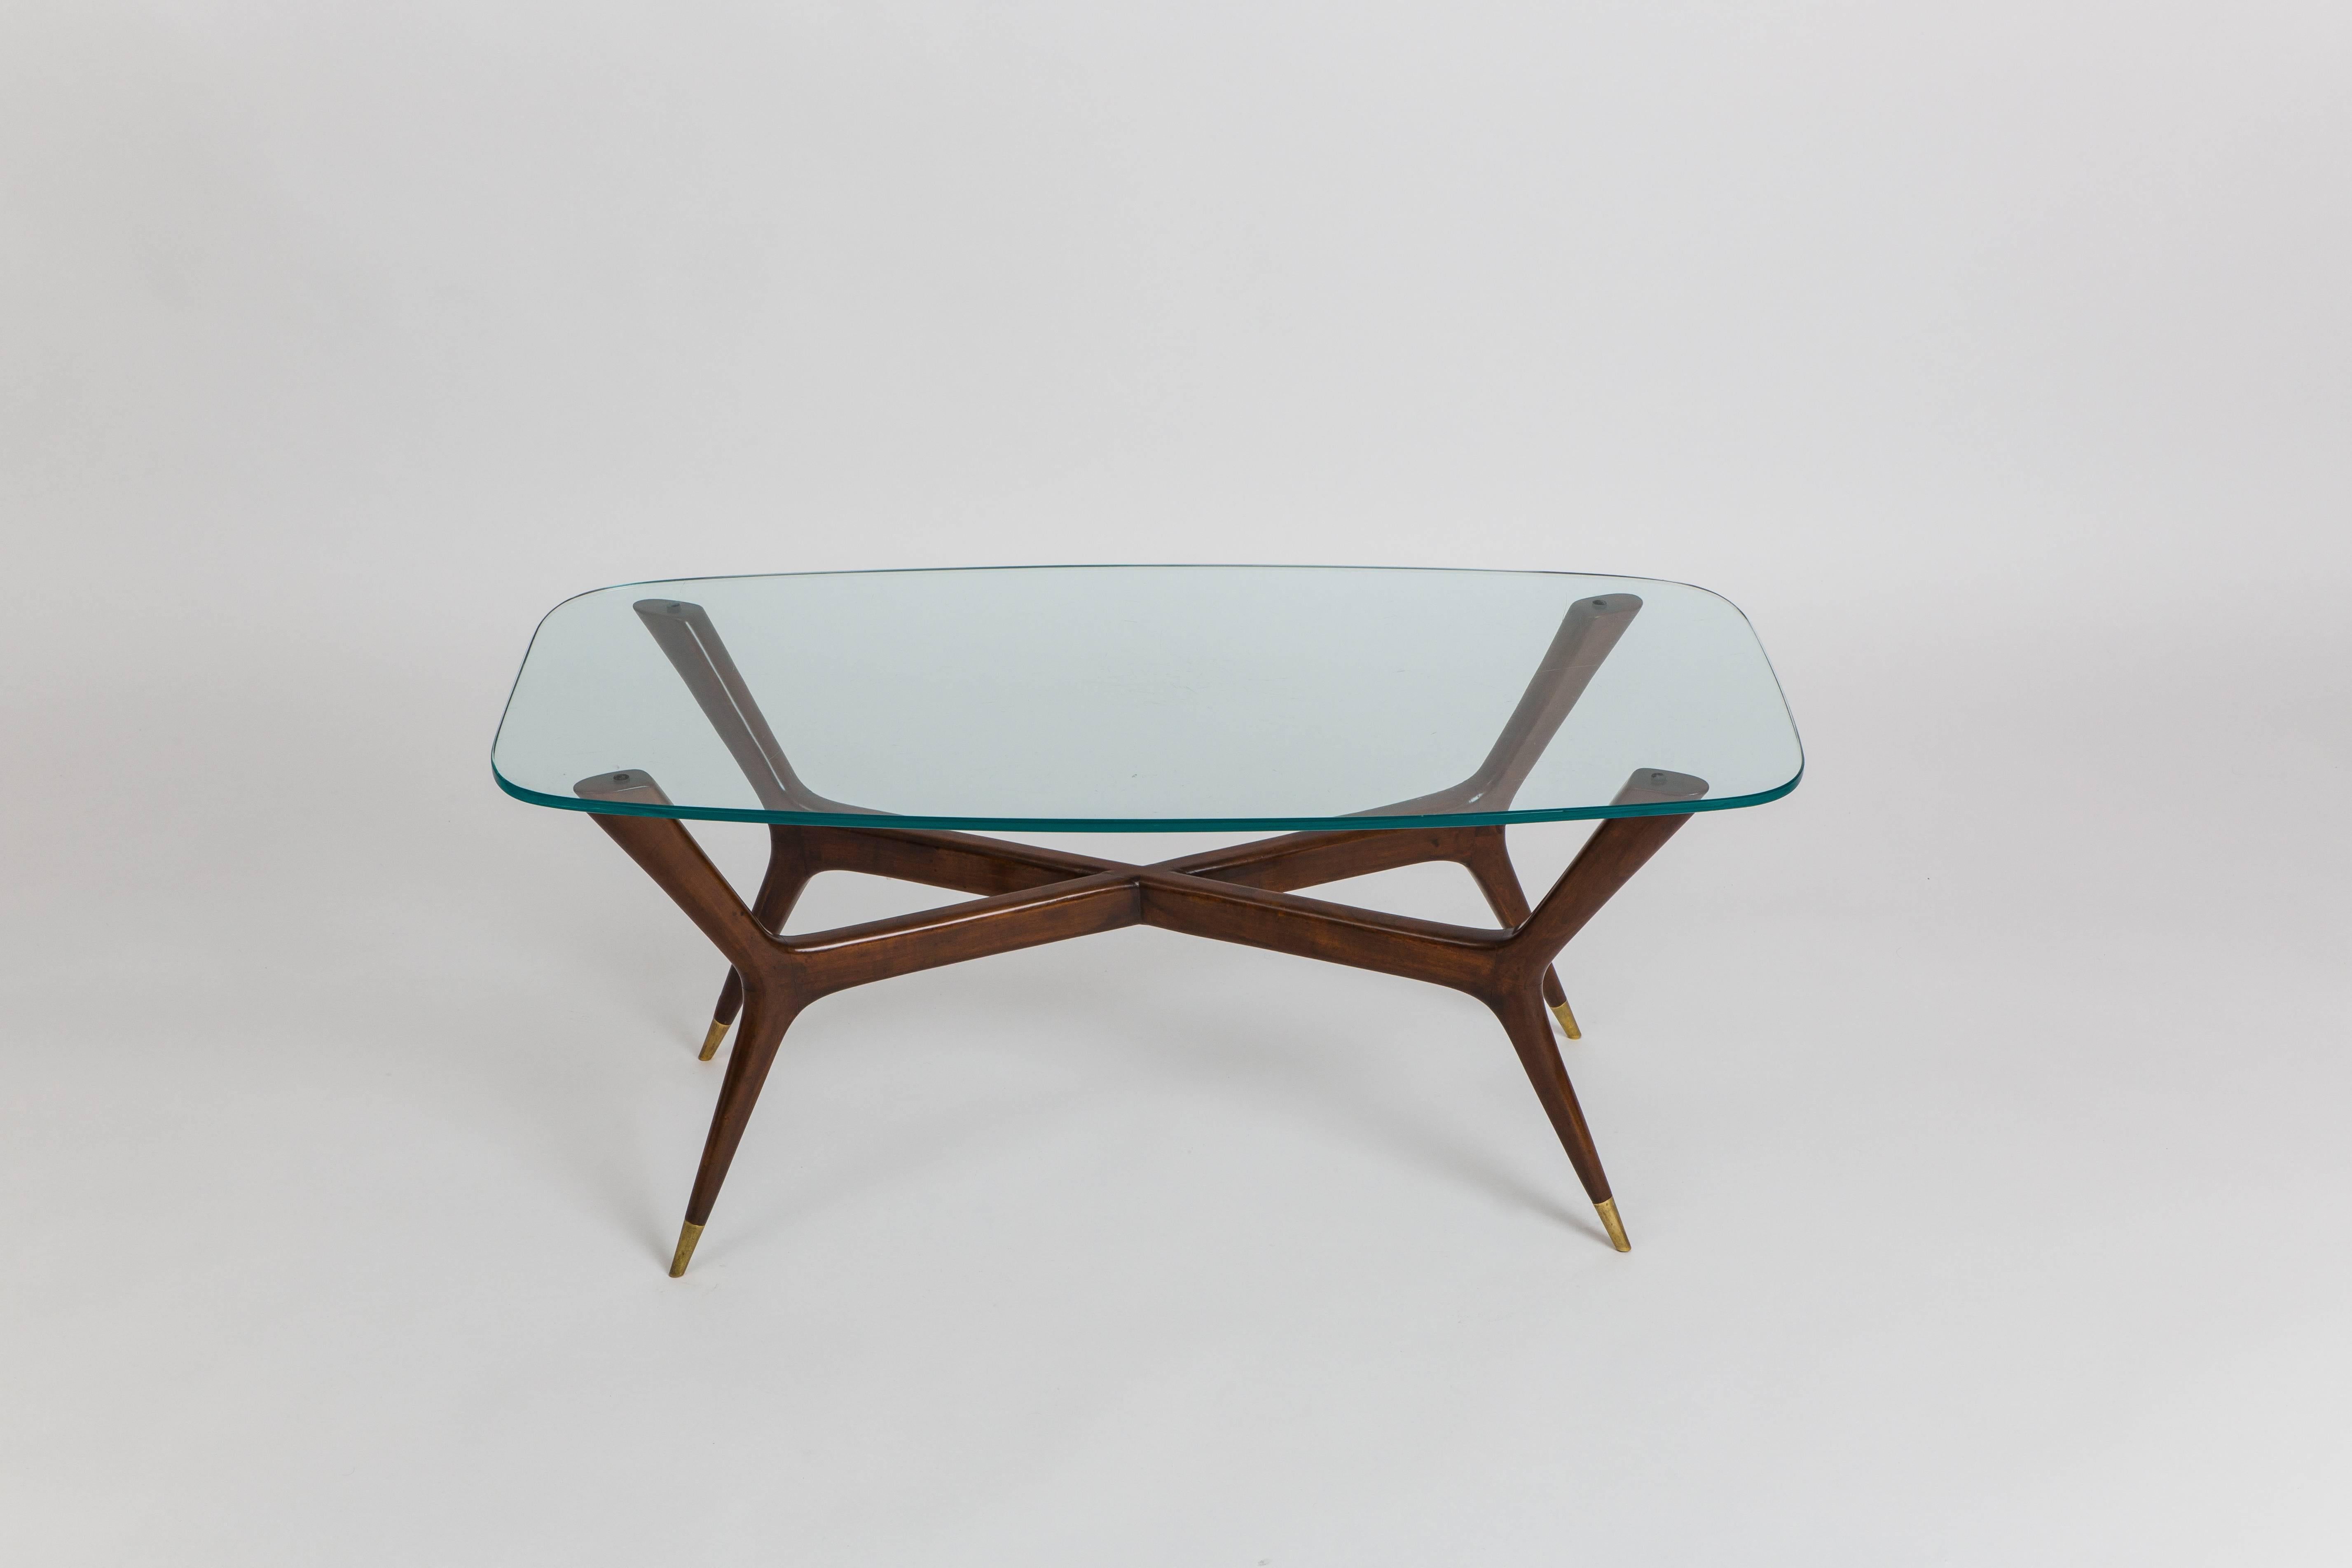 Gio Ponti elegant rare coffee table composed of sculptural Italian walnut legs ending in bronze sabots and thick glass top, Italy, 1950s.

Sold with Certificate of Authenticity from Gio Ponti archives.

Provenance:
Vedani office, Milan